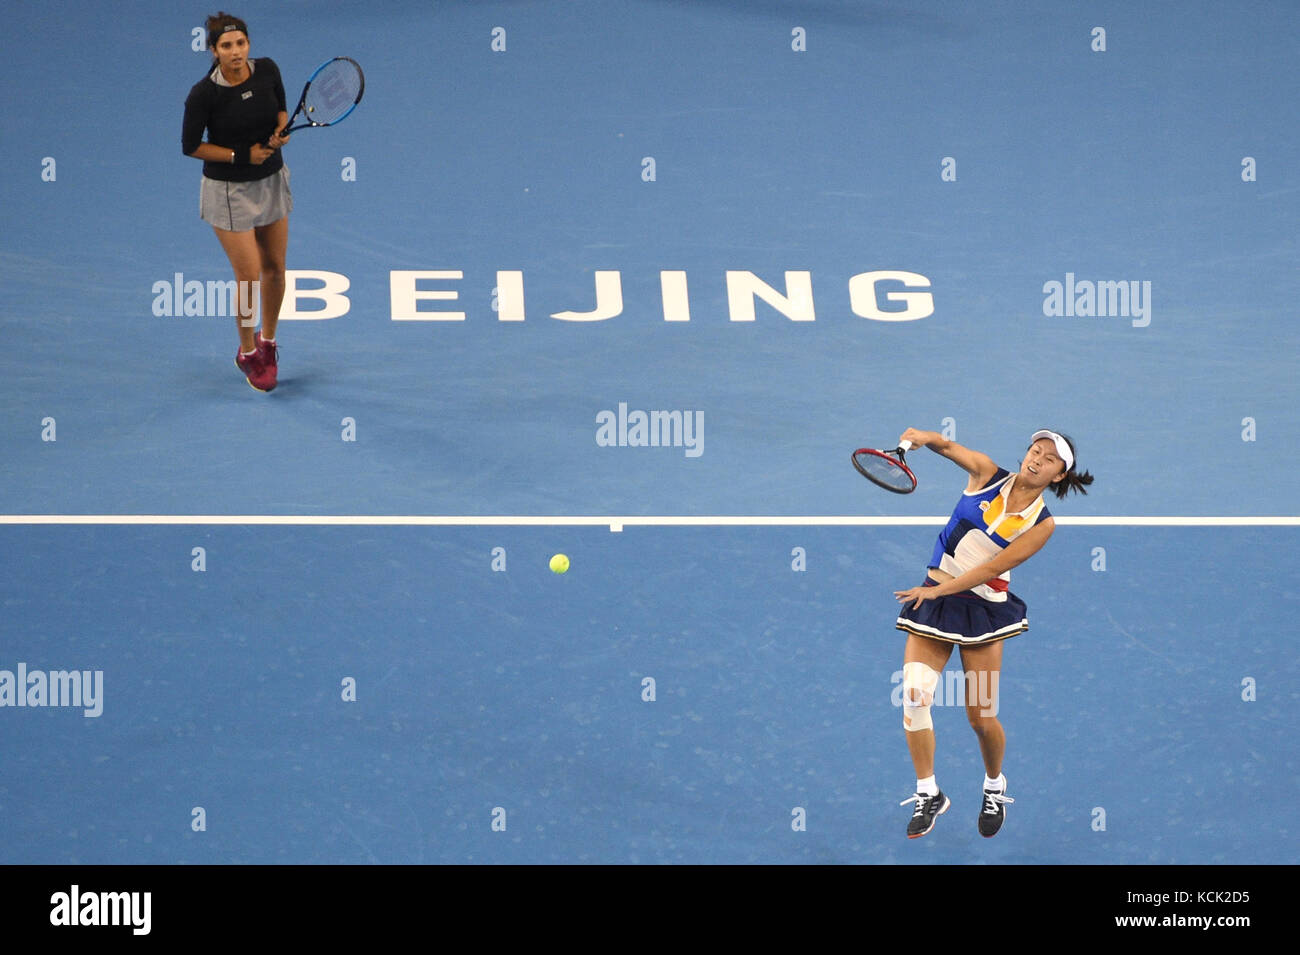 Beijing, China. 6th Oct, 2017. China's Peng Shuai (R) and India's Sania Mirza compete during the women's doubles quarter-final match against Katerina Siniakova/Barbora Strycova of the Czech Republic at the China Open tennis tournament in Beijing on Oct. 6, 2017. Credit: Ju Huanzong/Xinhua/Alamy Live News Stock Photo